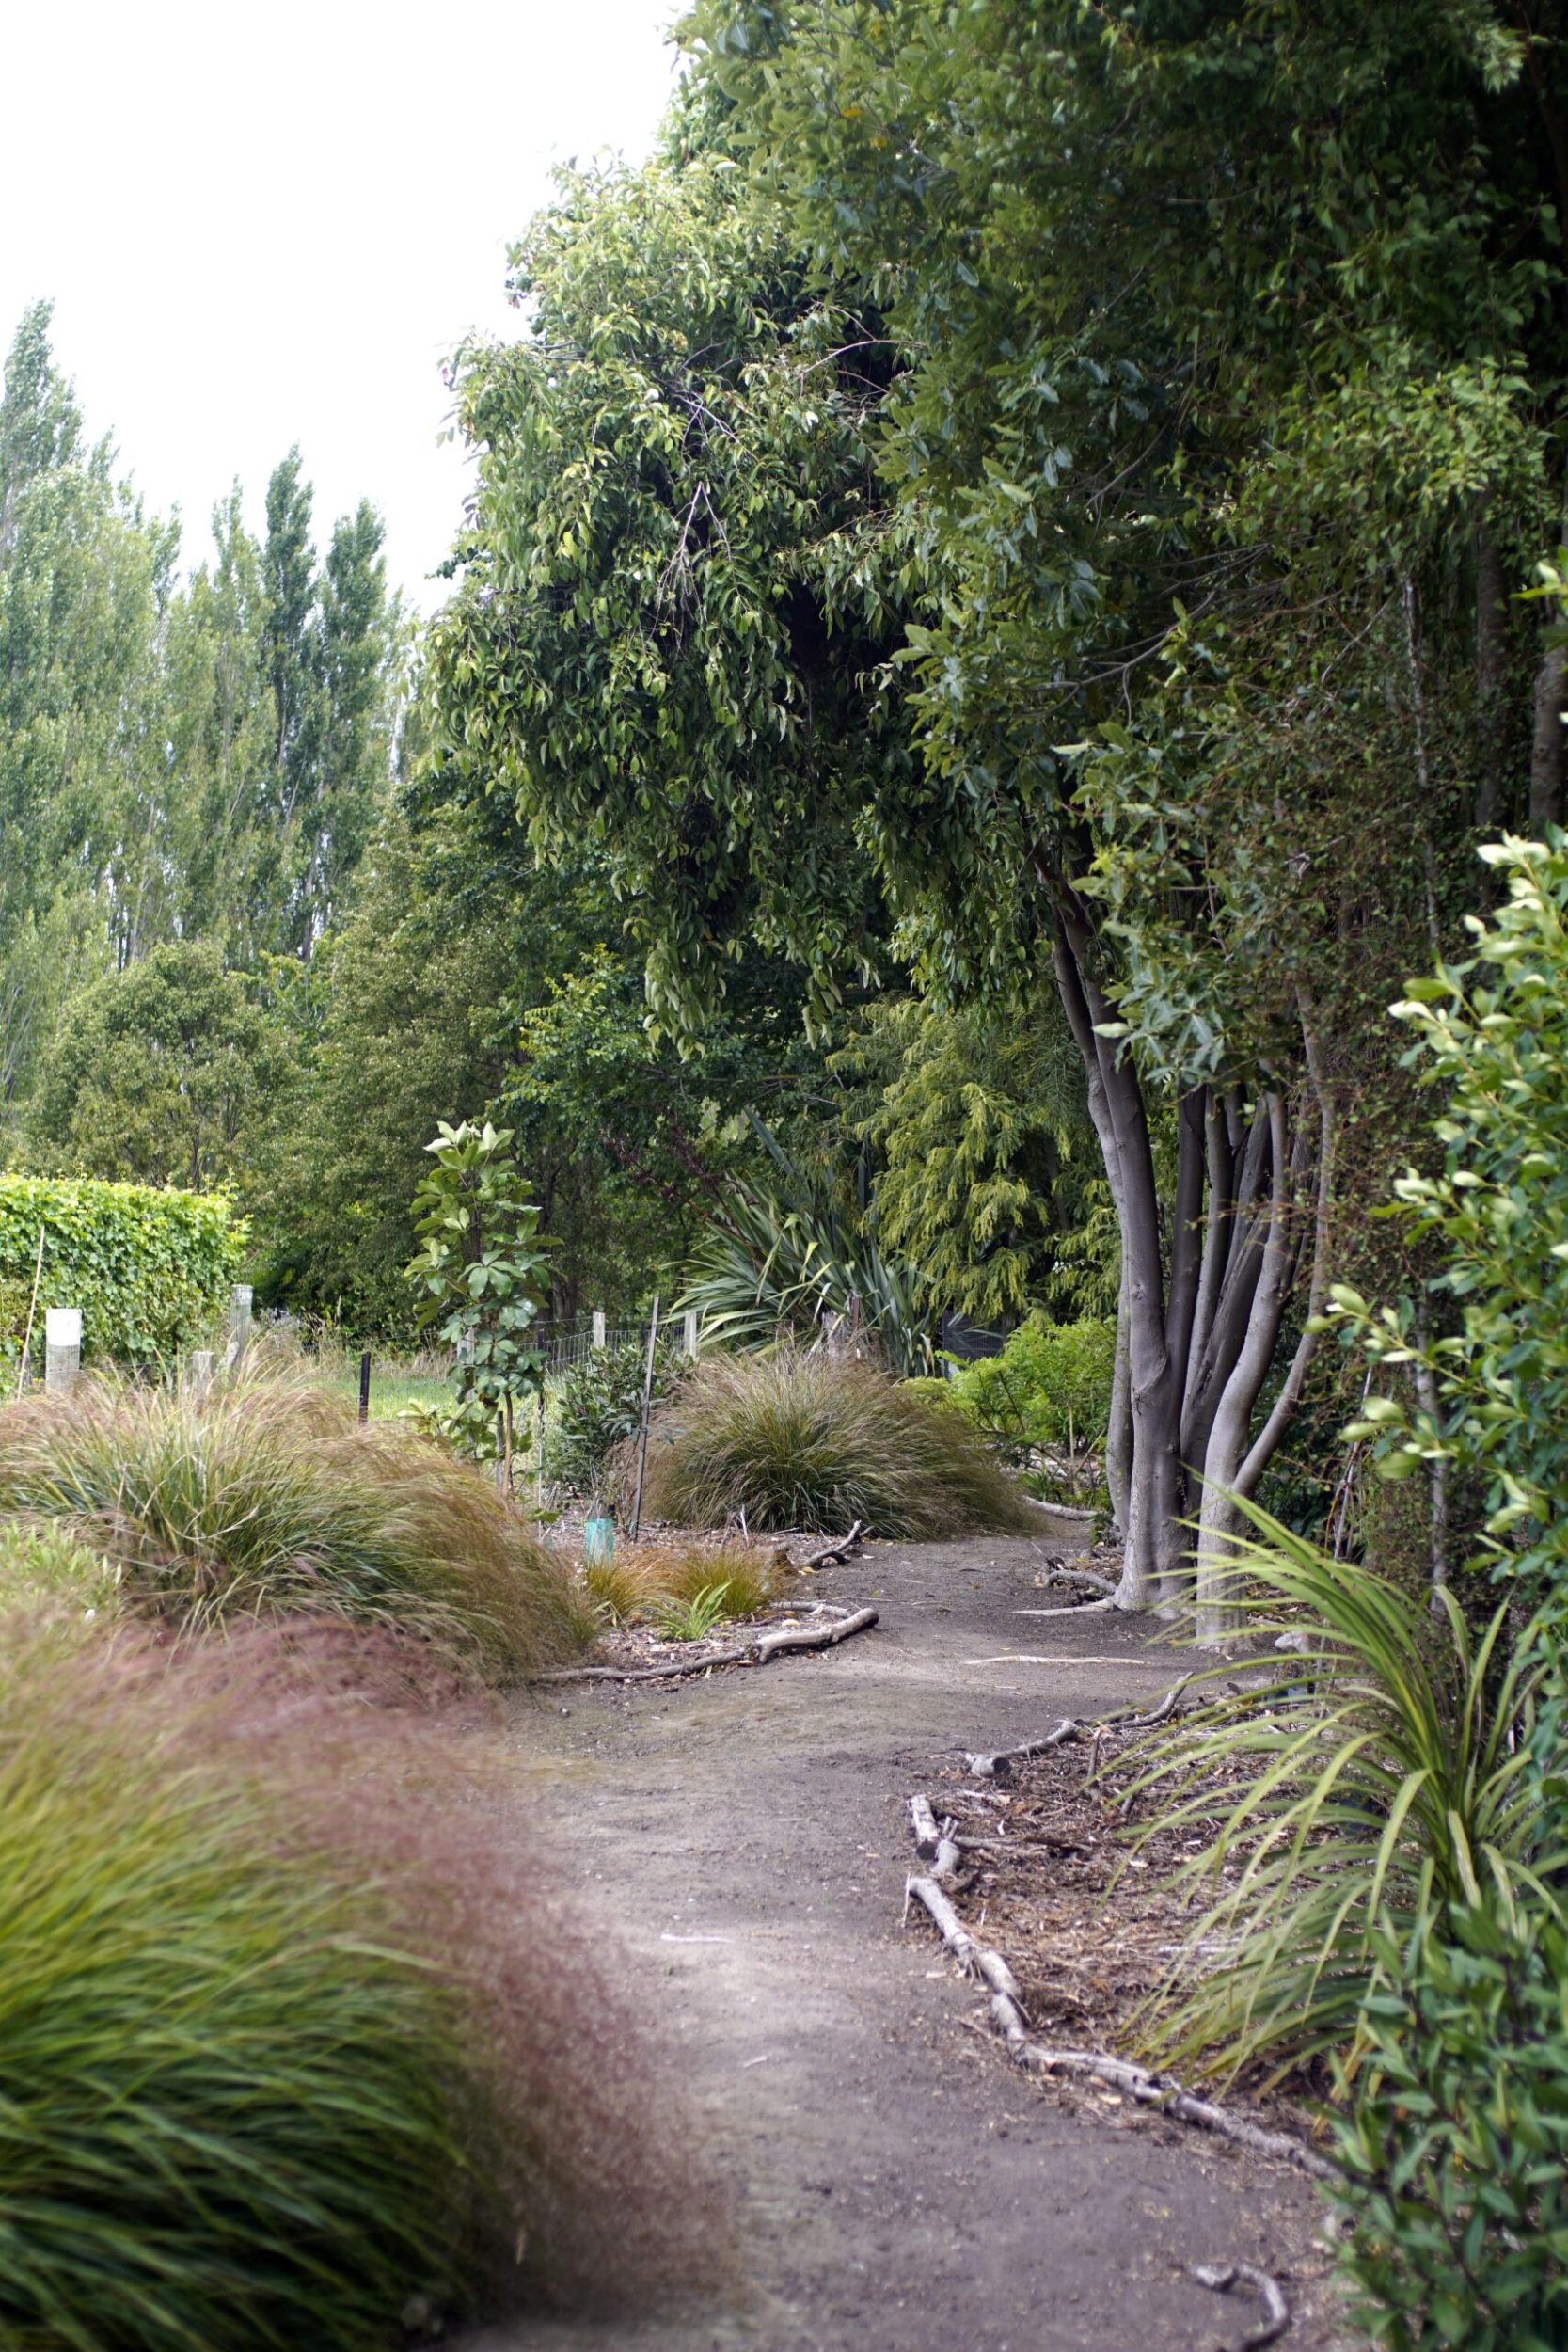 A garden with paths marked by branches